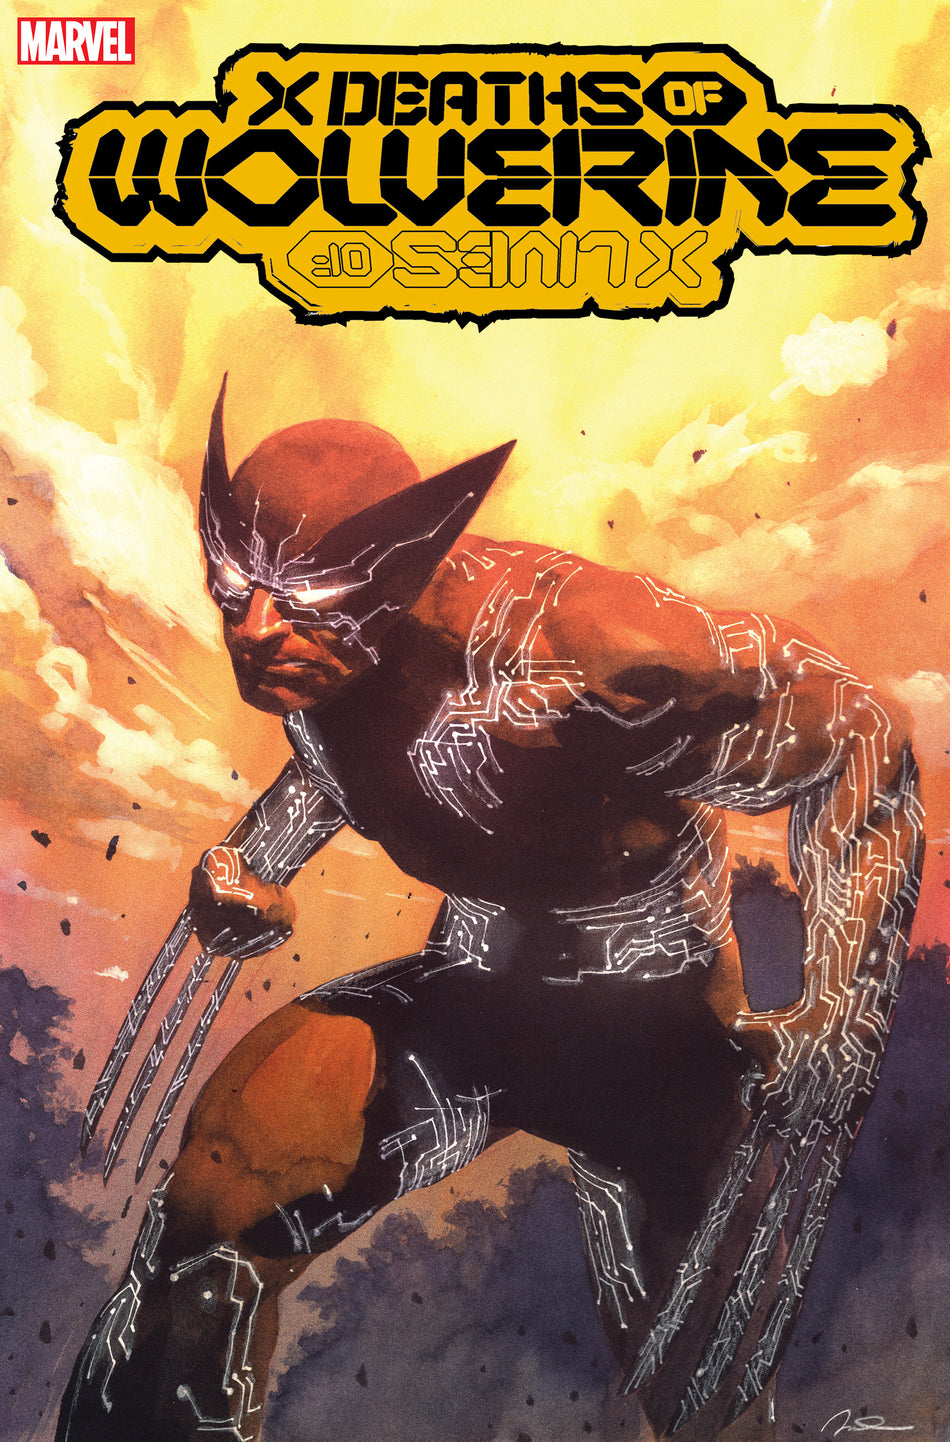 Image of X Deaths of Wolverine 1 Parel Variant comic sold by Stronghold Collectibles.